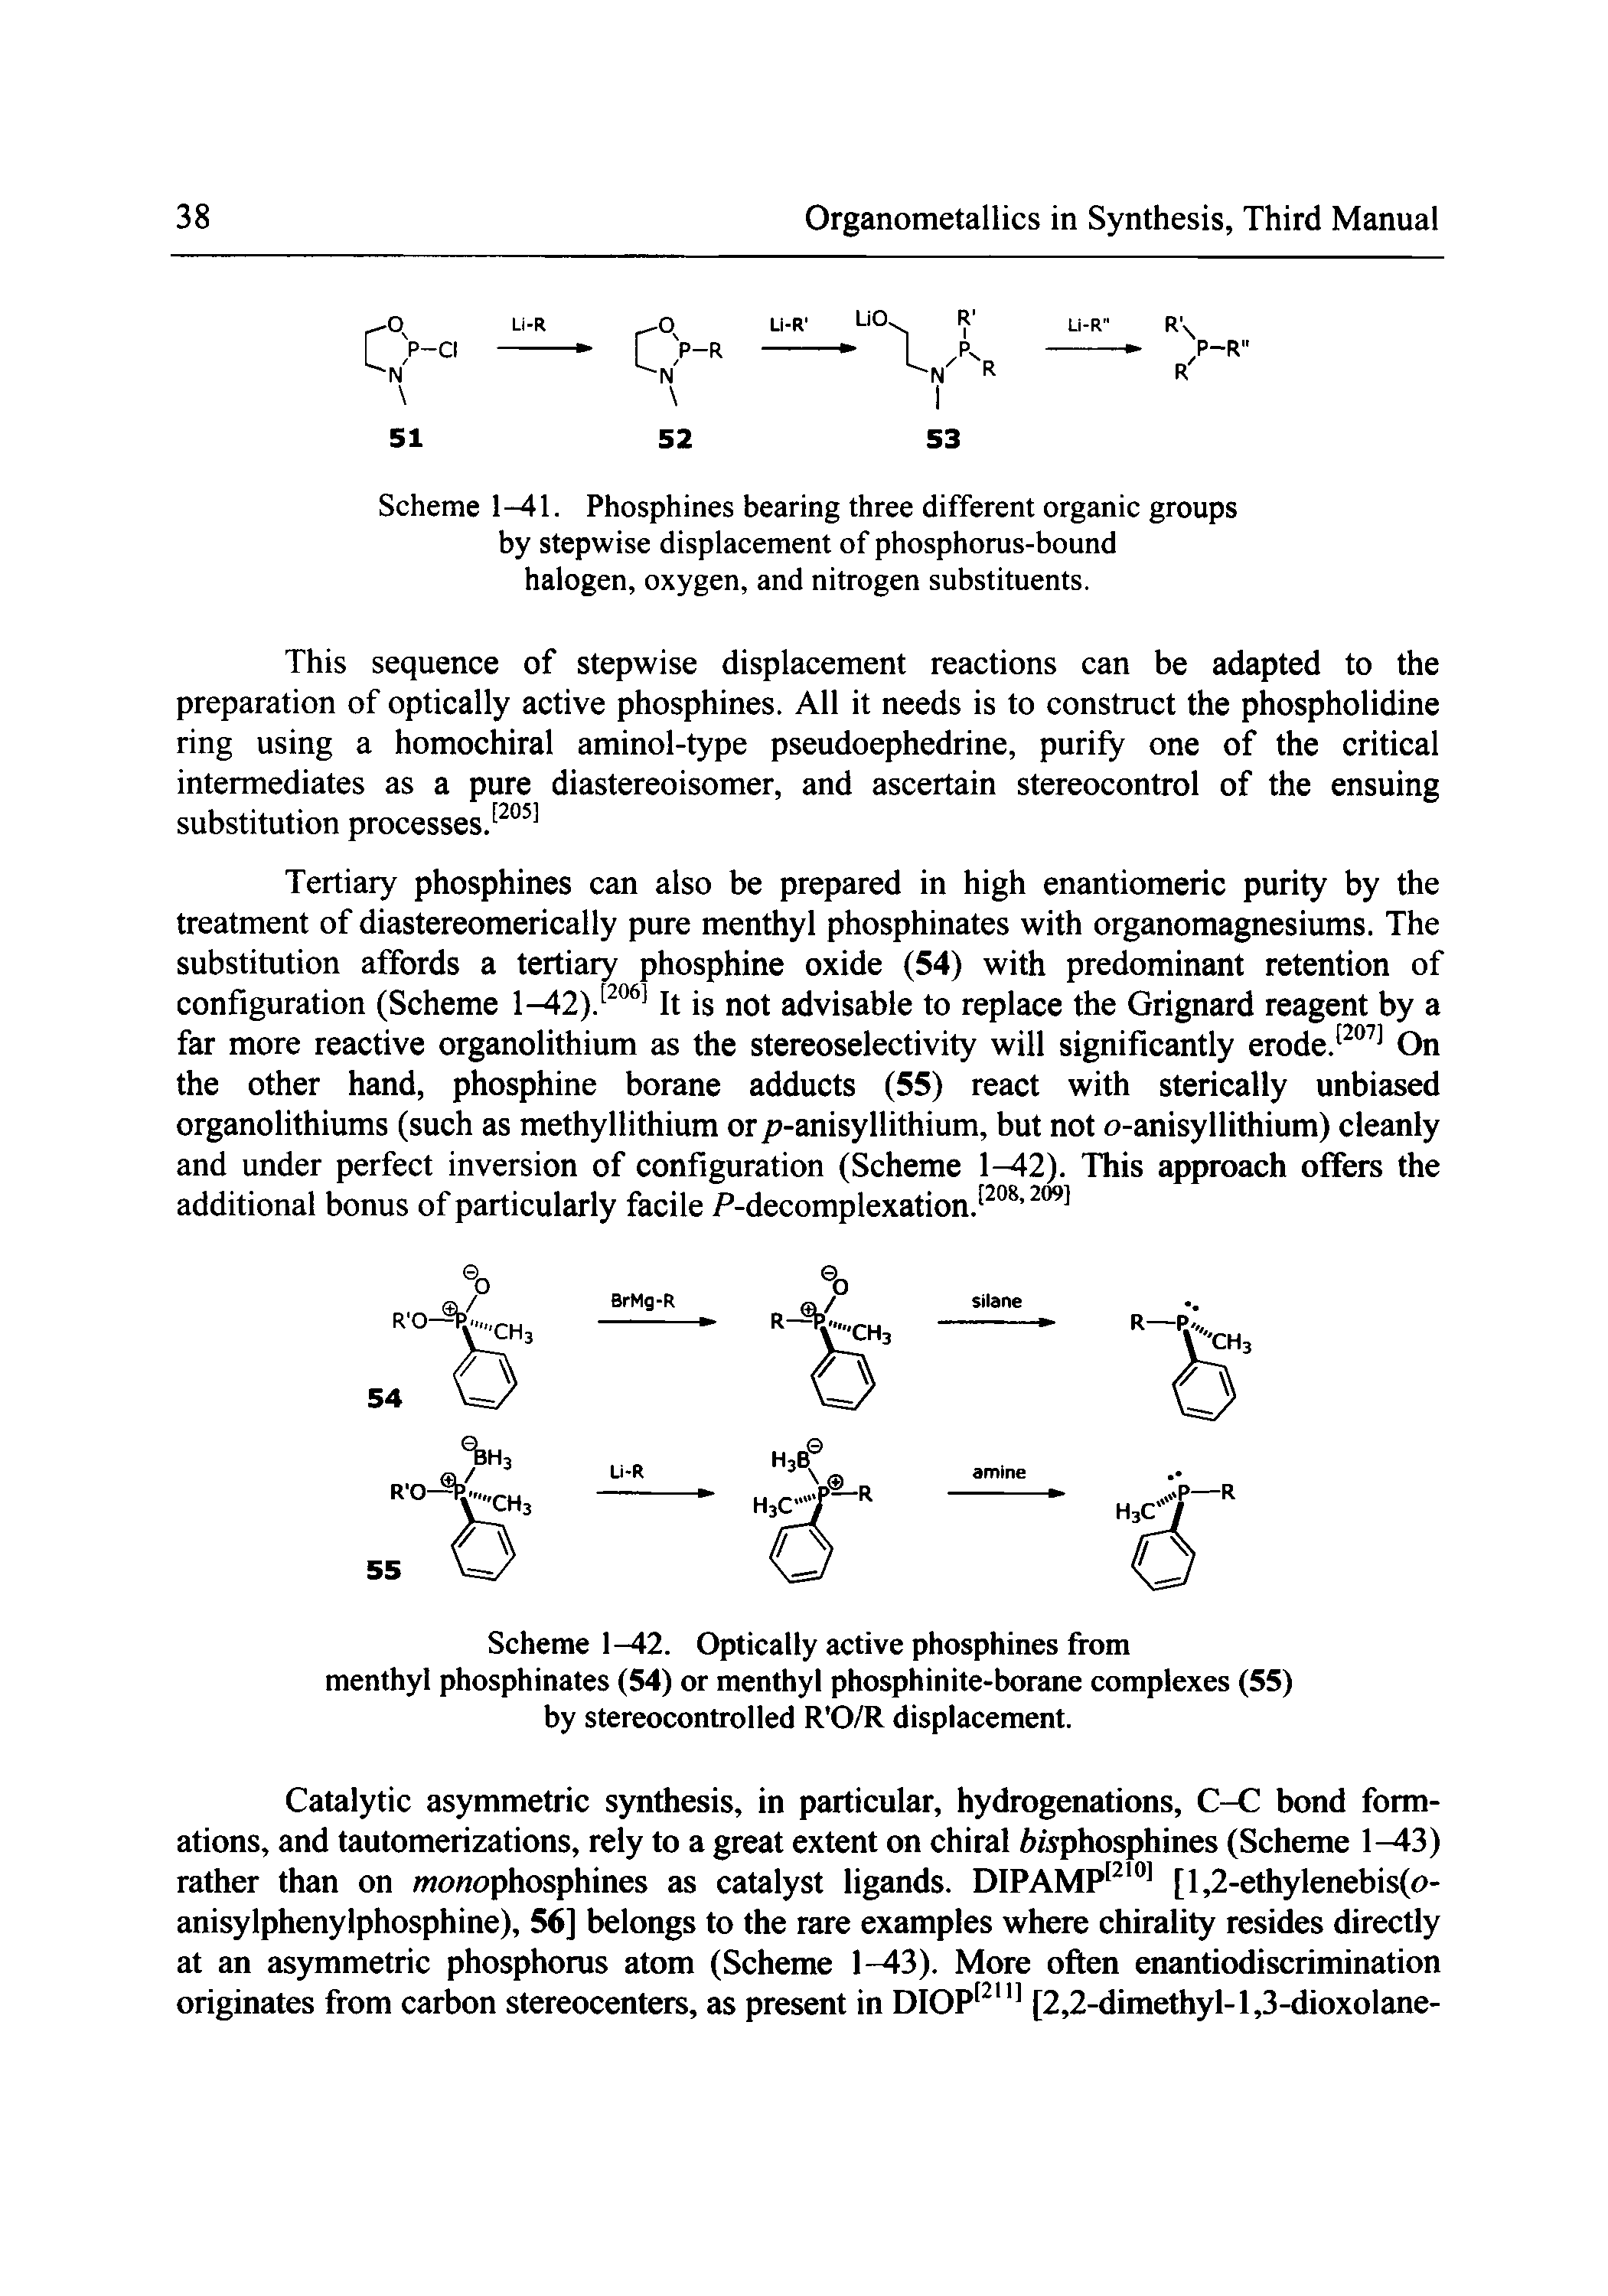 Scheme 1-42. Optically active phosphines from menthyl phosphinates (54) or menthyl phosphinite-borane complexes (55) by stereocontrolled R O/R displacement.